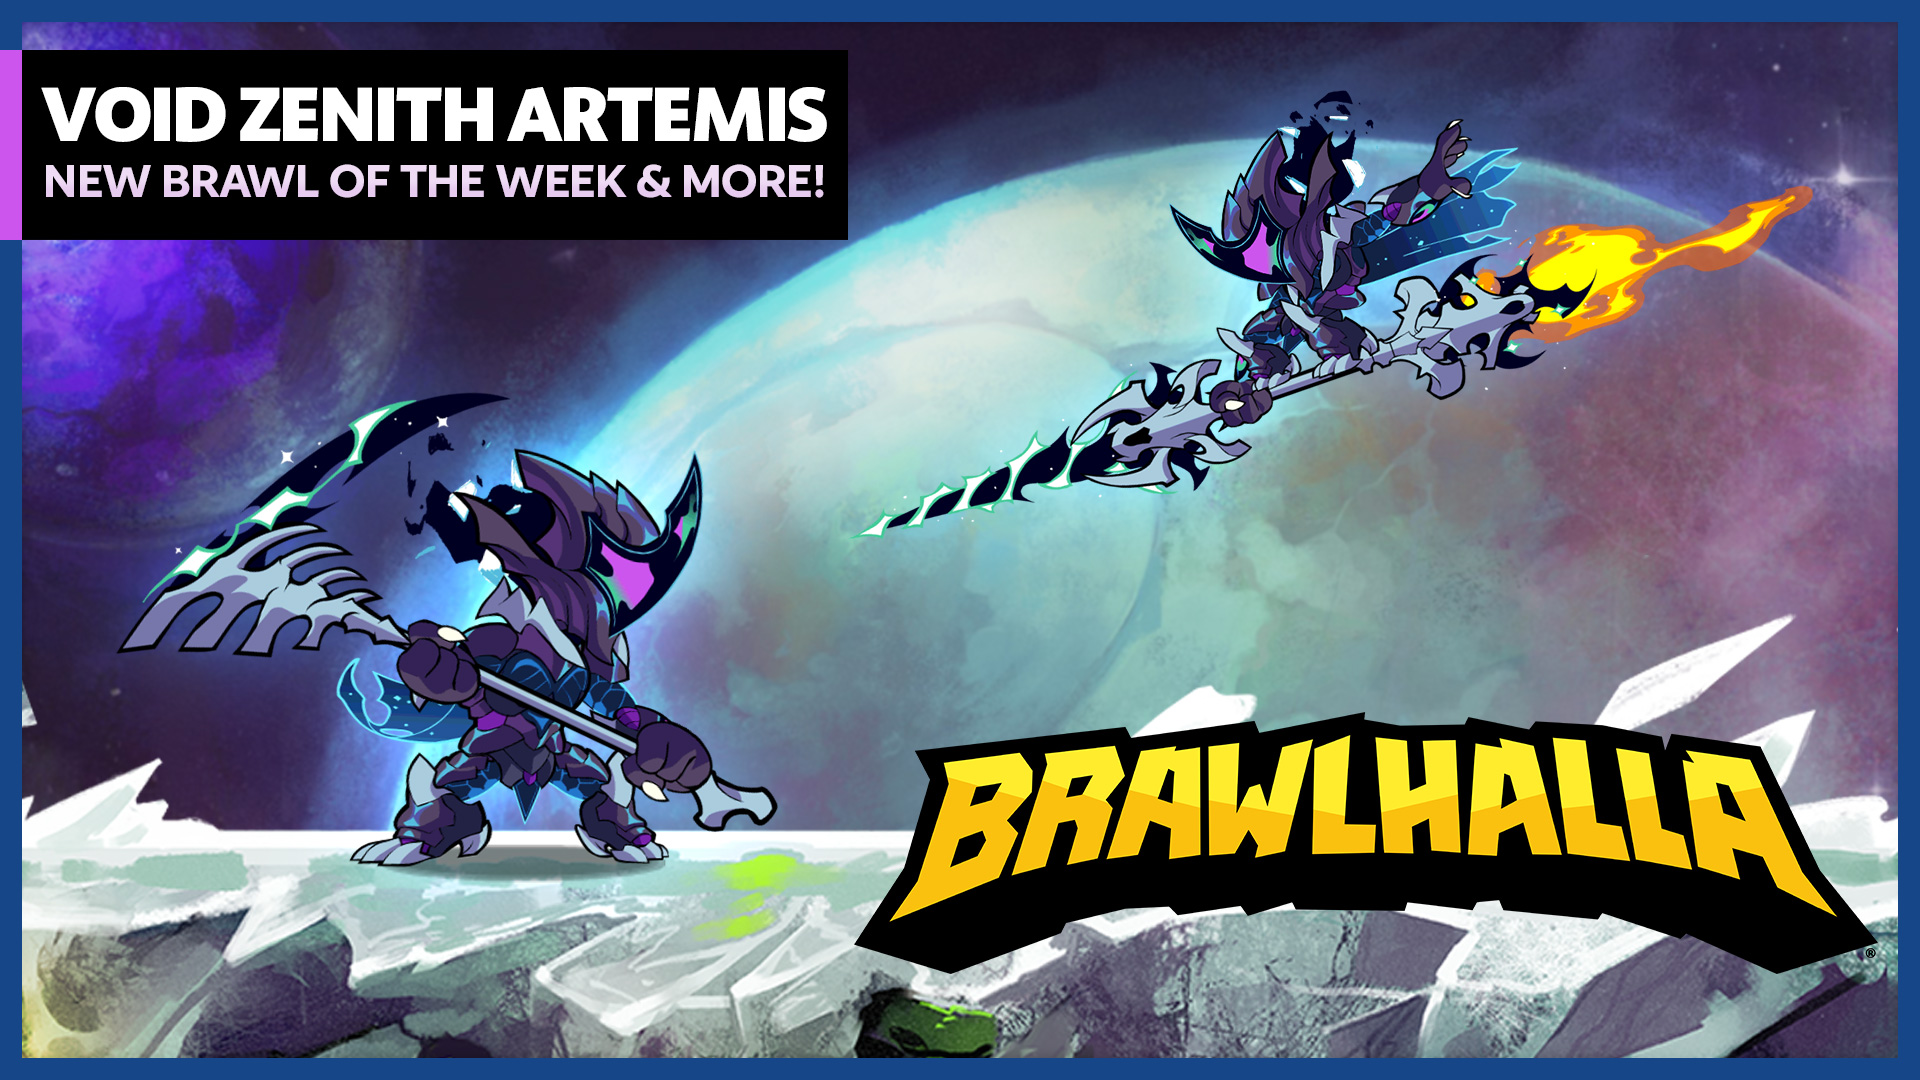 One More Week of Brawlhalla Fest!